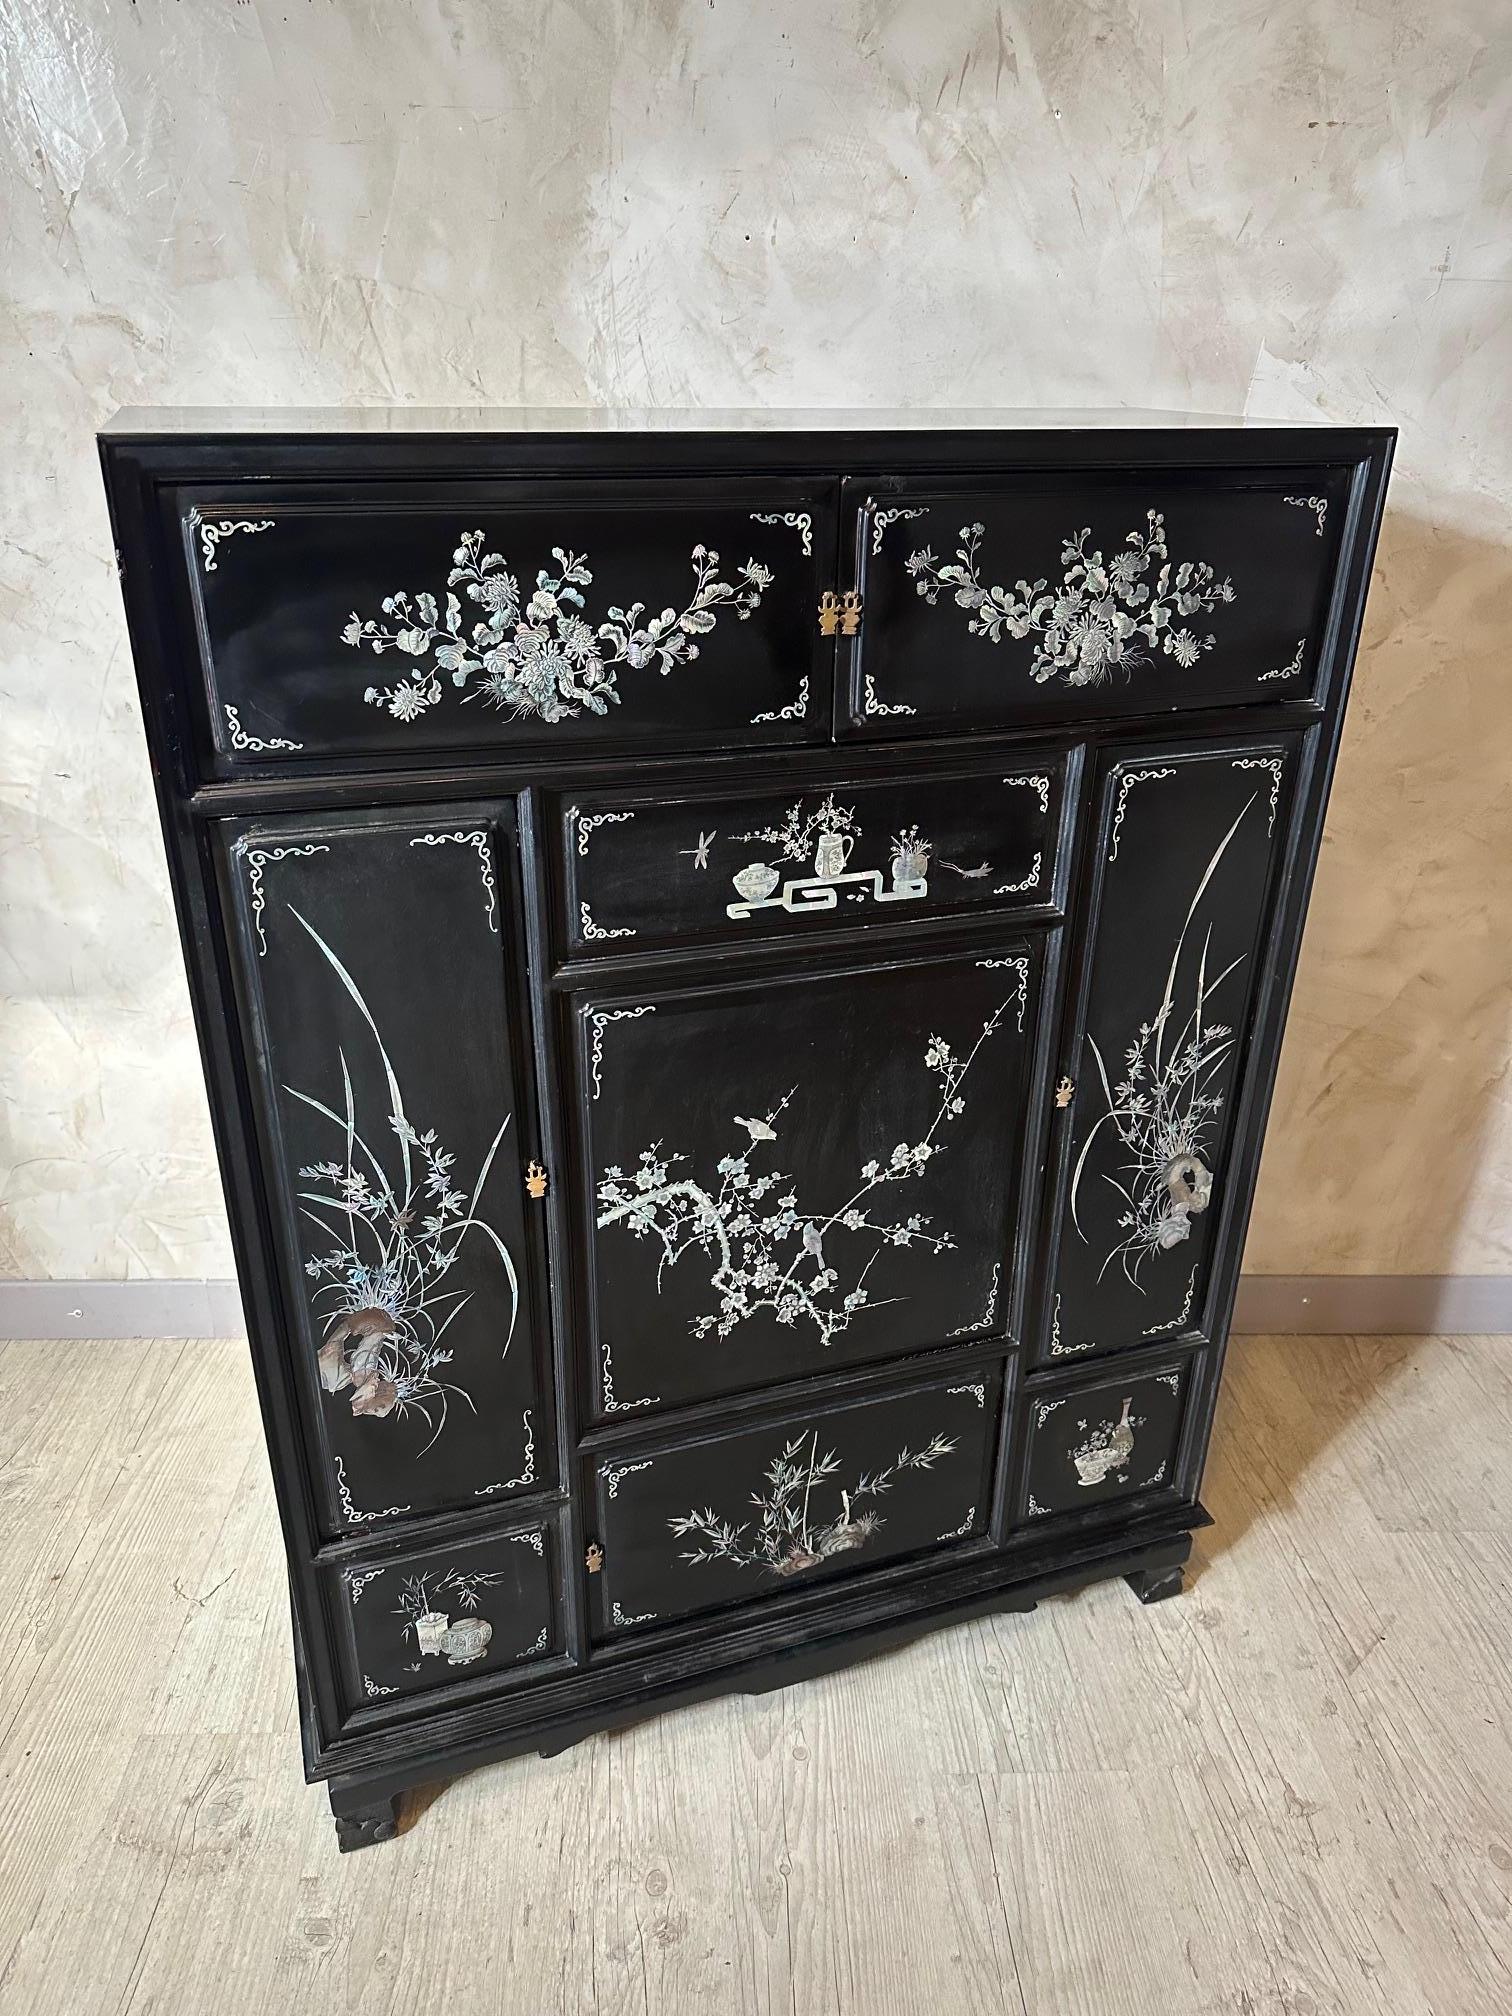 Very nice Vietnamese cupboard dating from the 1950s in lacquered wood and mother-of-pearl inlays decorated with flowers, bamboo, butterflies, vases...
Several opening doors. Some imperfections but good general condition.
Manufacturer's labels inside.